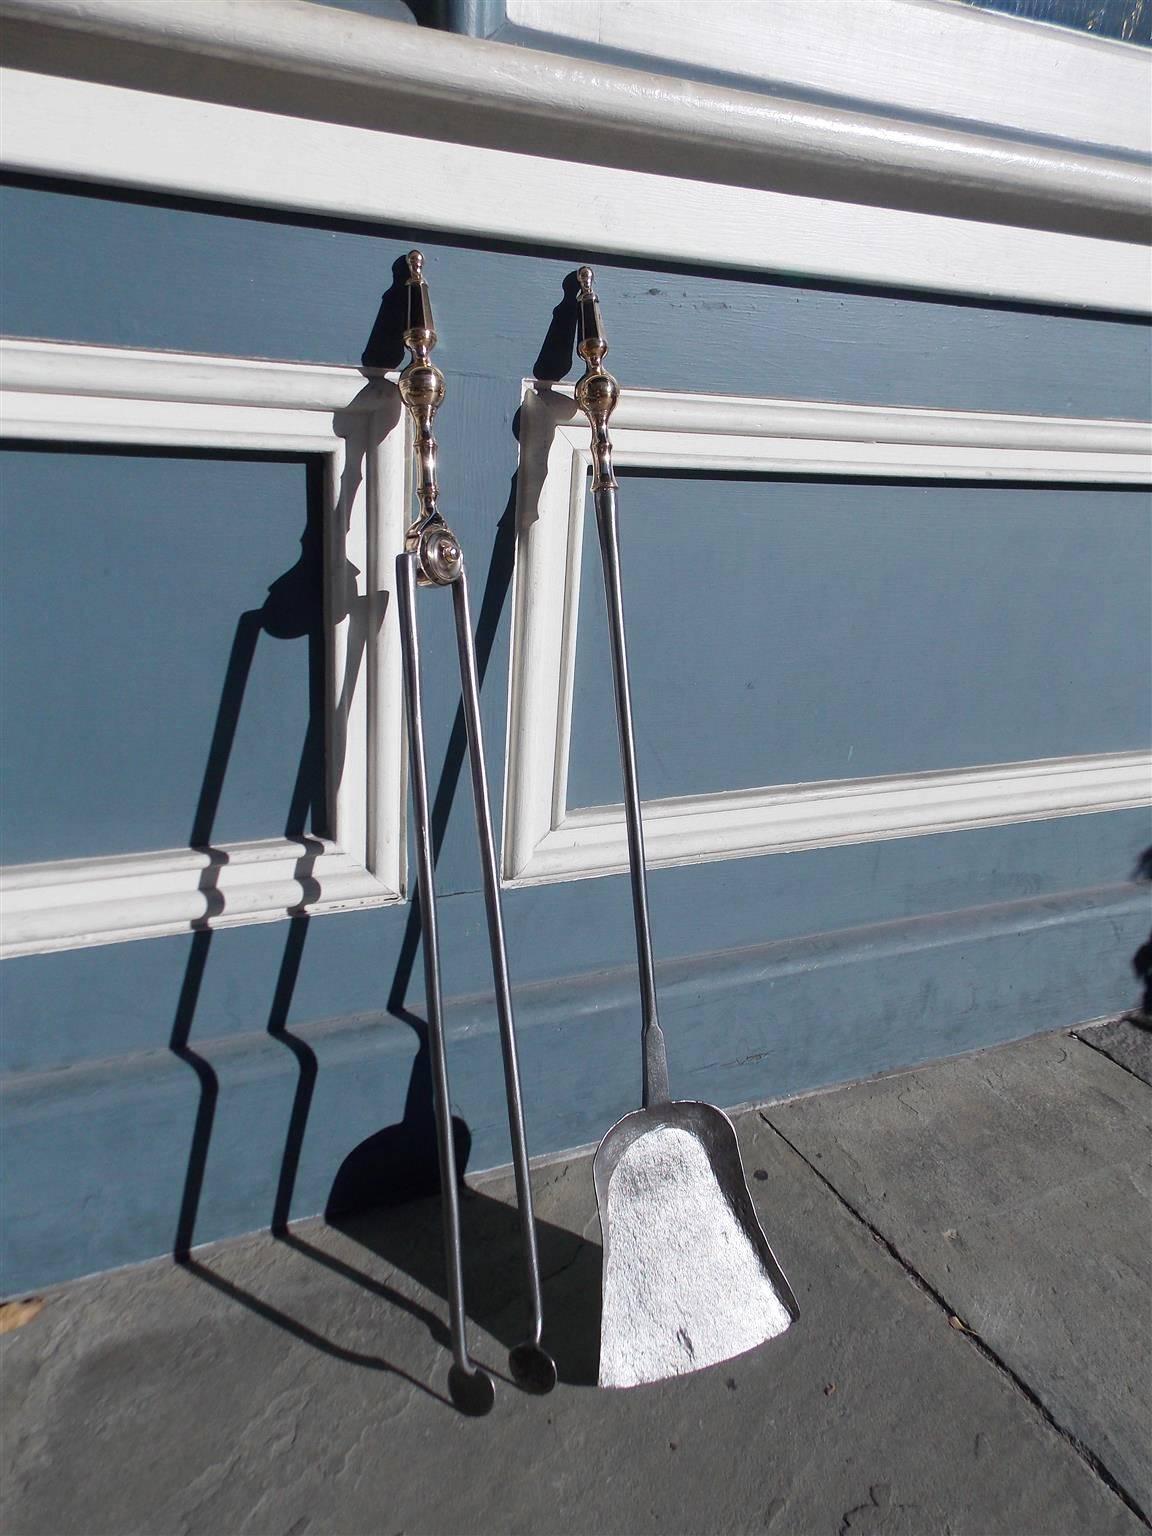 Pair of American brass and polished fire tools with ball chased banded finials and faceted steeple tops. Set consist of tong and shovel. Early 19th century.